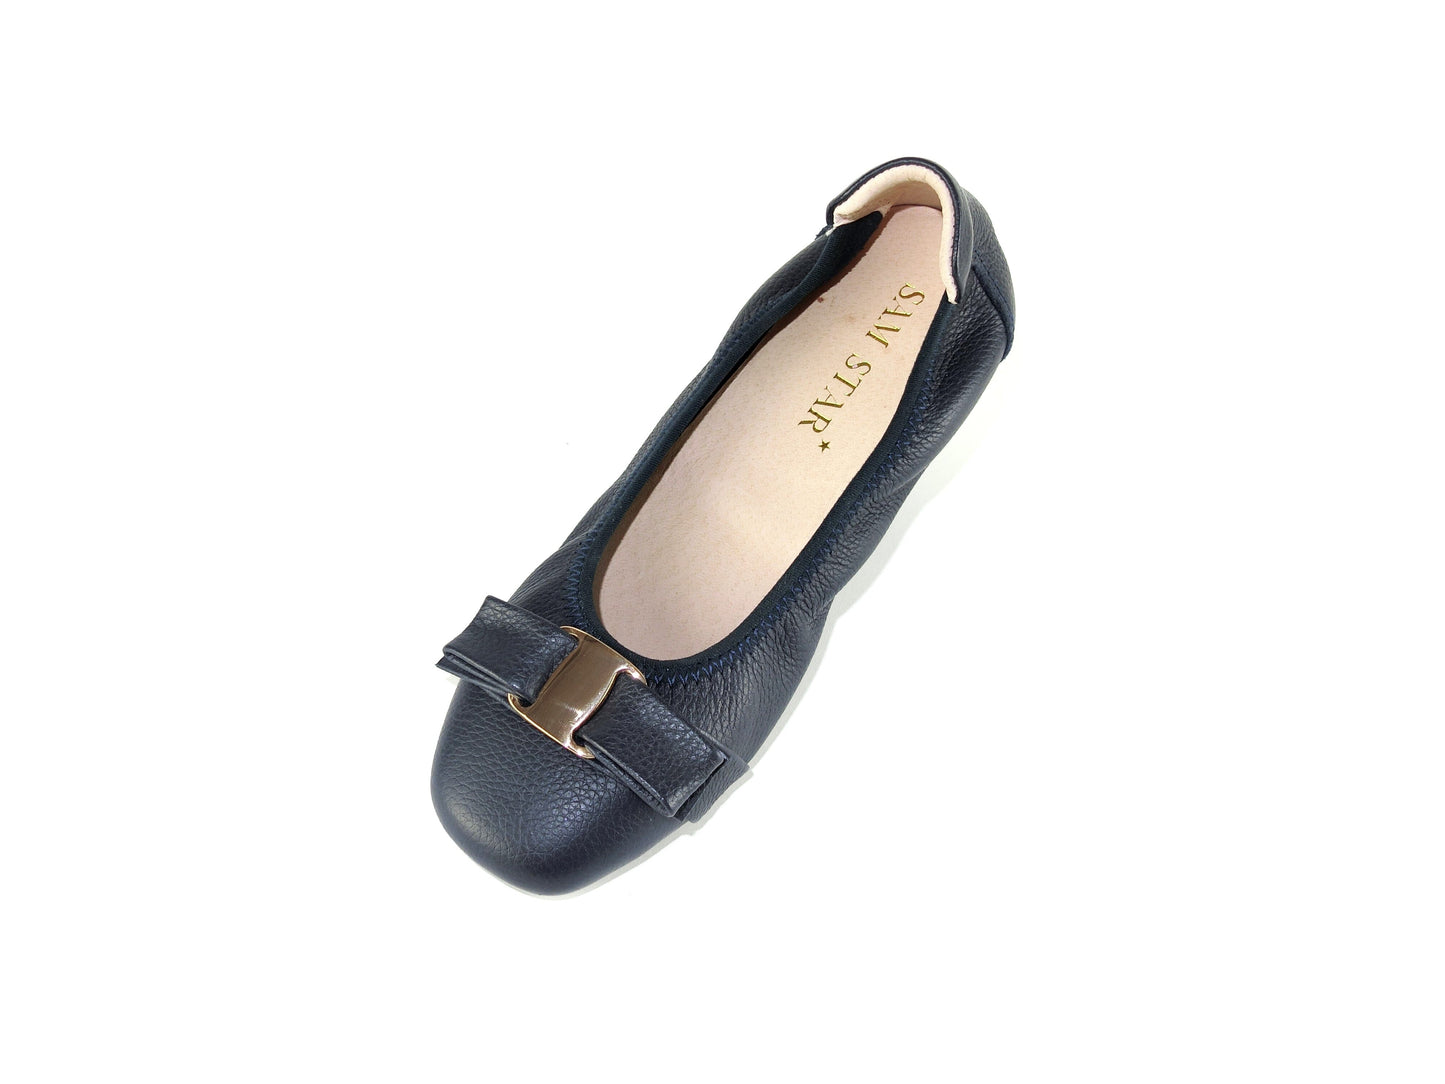 163-13 Leather pumps with gold buckle ( SALE ) Pumps Sam Star shoes Navy 36/3 